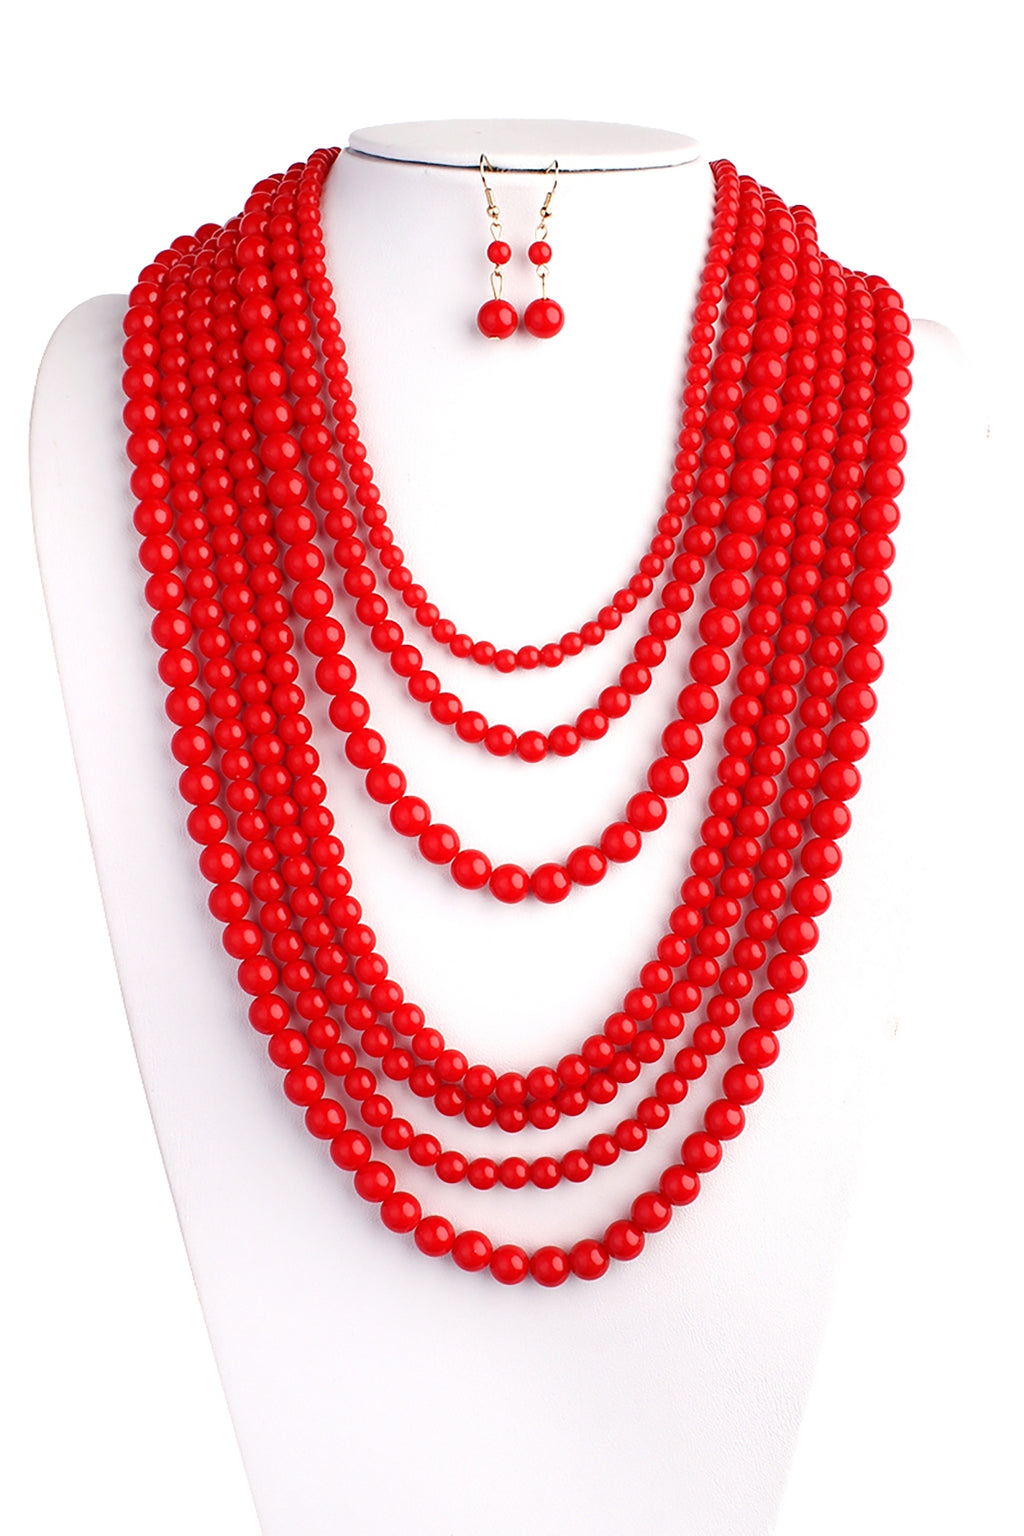 Multilayer Acrylic Red Necklace and Earring Set - Pack of 6